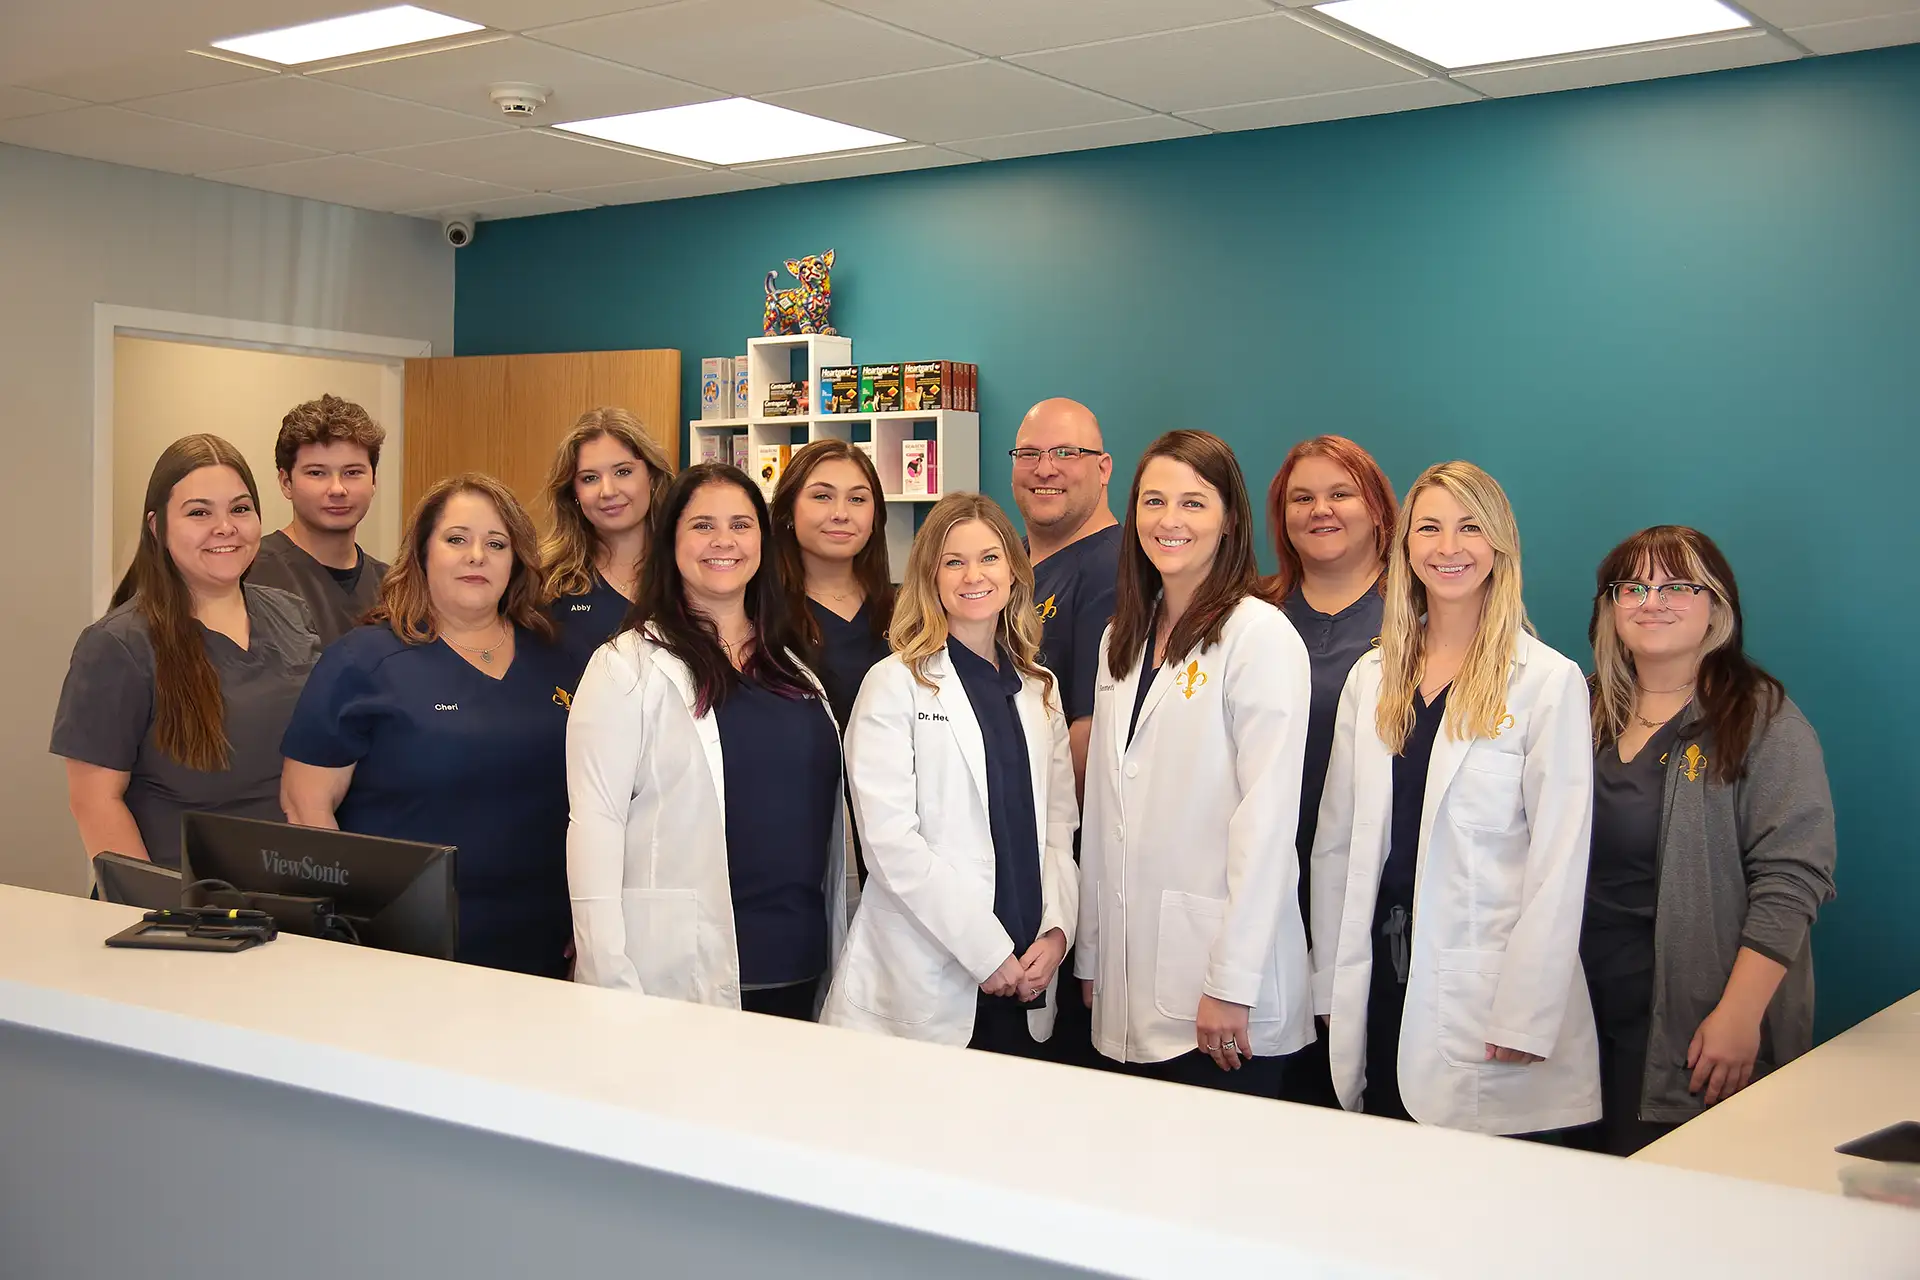 Group image of Clearview Veterinary Hospital staff and doctors.